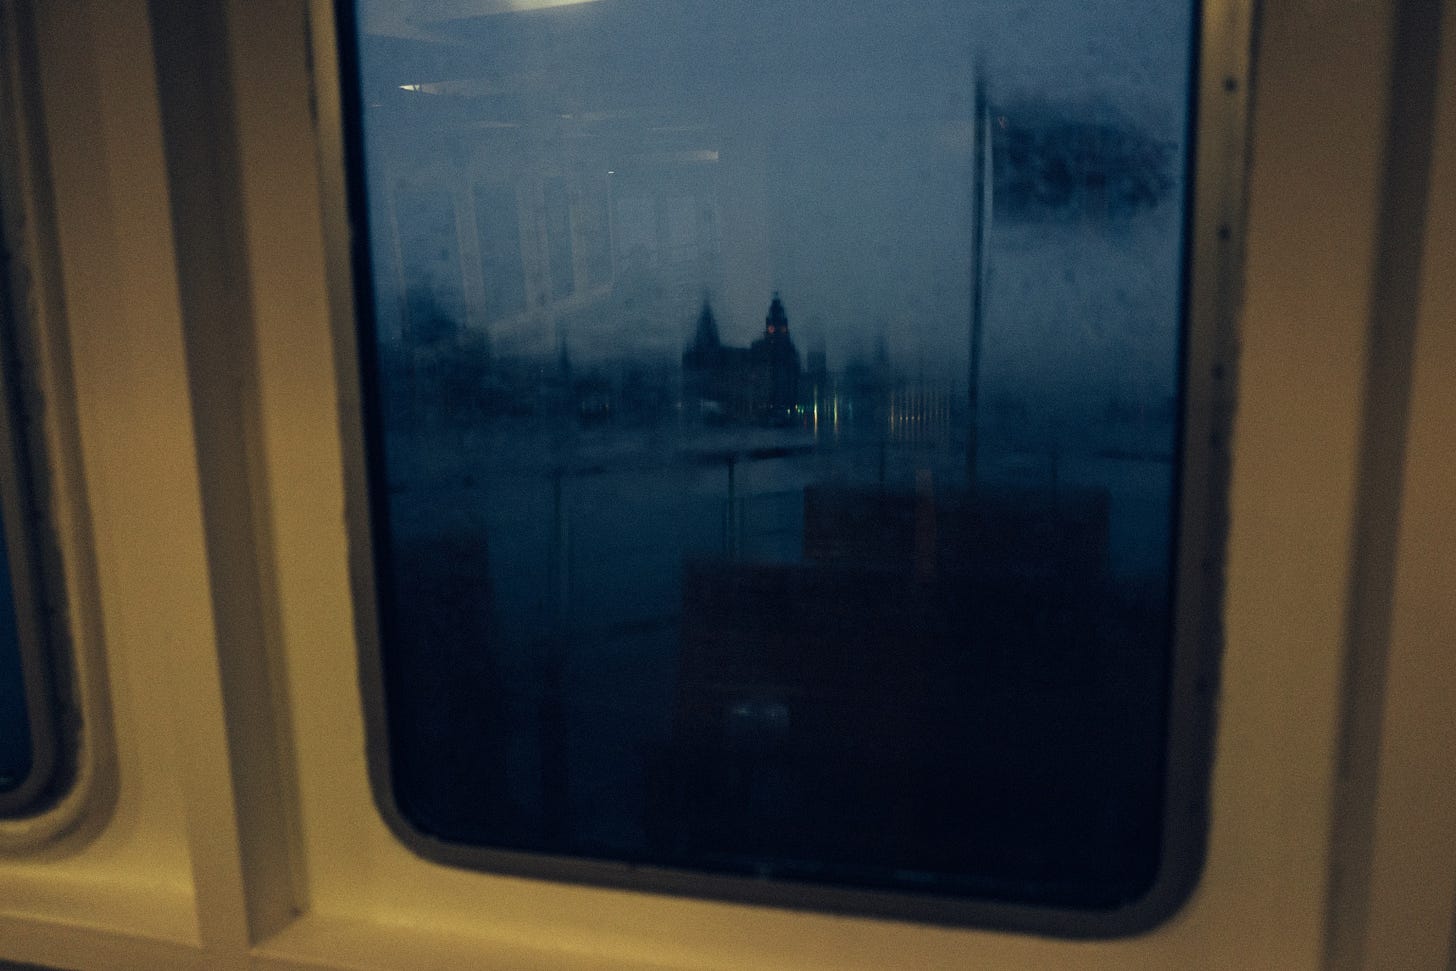 At dusk, through a rain-soaked window on the Mersey Ferry, the Liver Building appears.